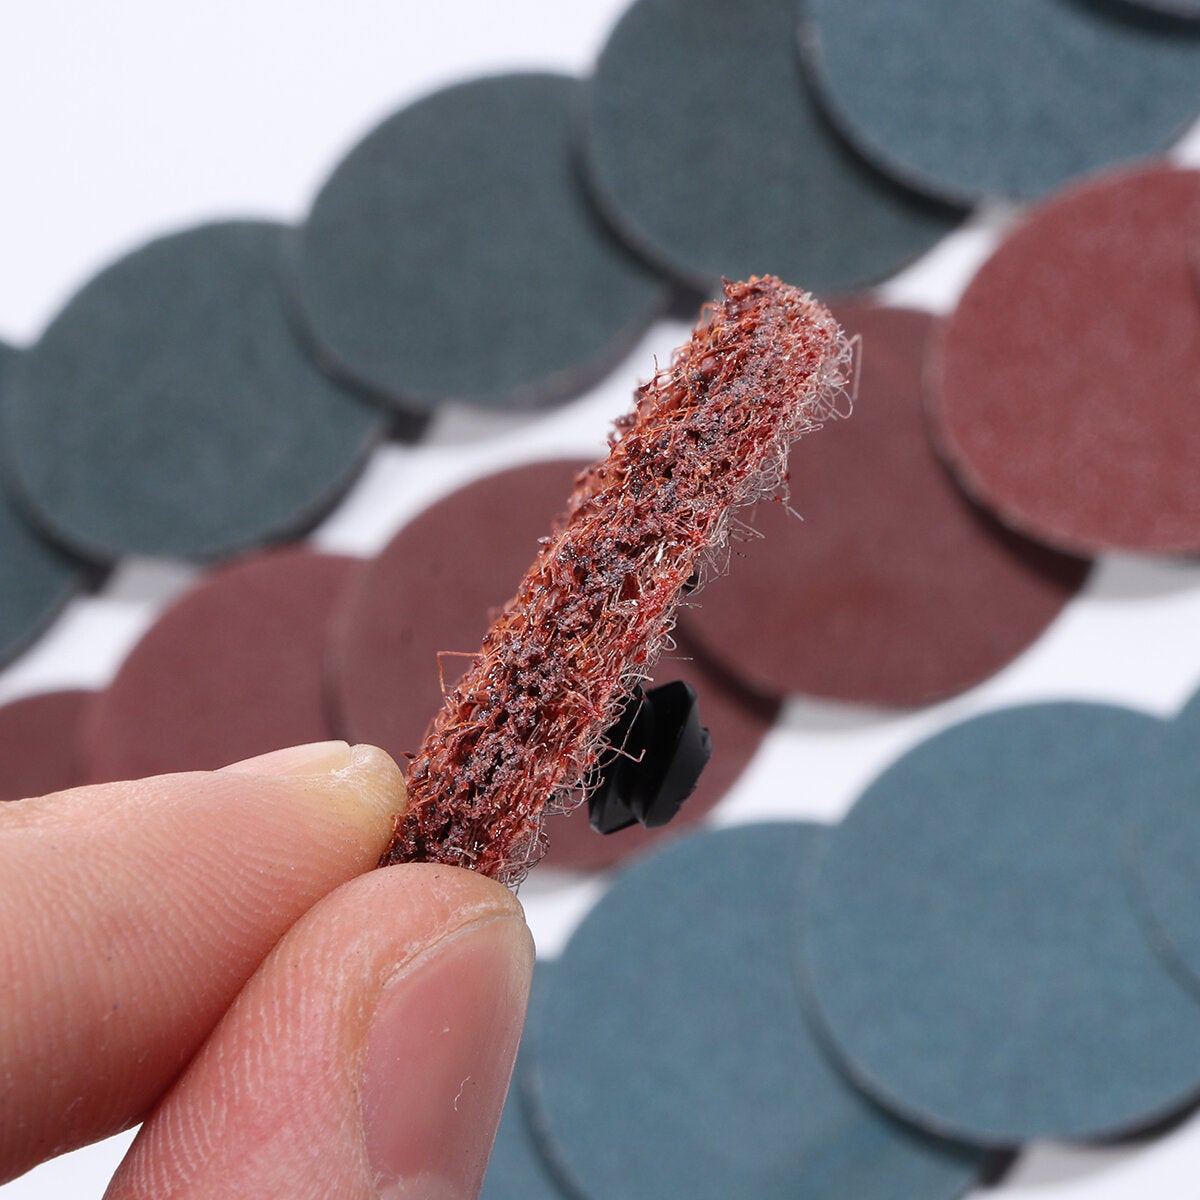 60pcs 2 Inch 50mm Sanding Discs Roll Lock Surface Sanding Discs Pad Polishing Sandpaper Quick Change Disc For Rotary Tools